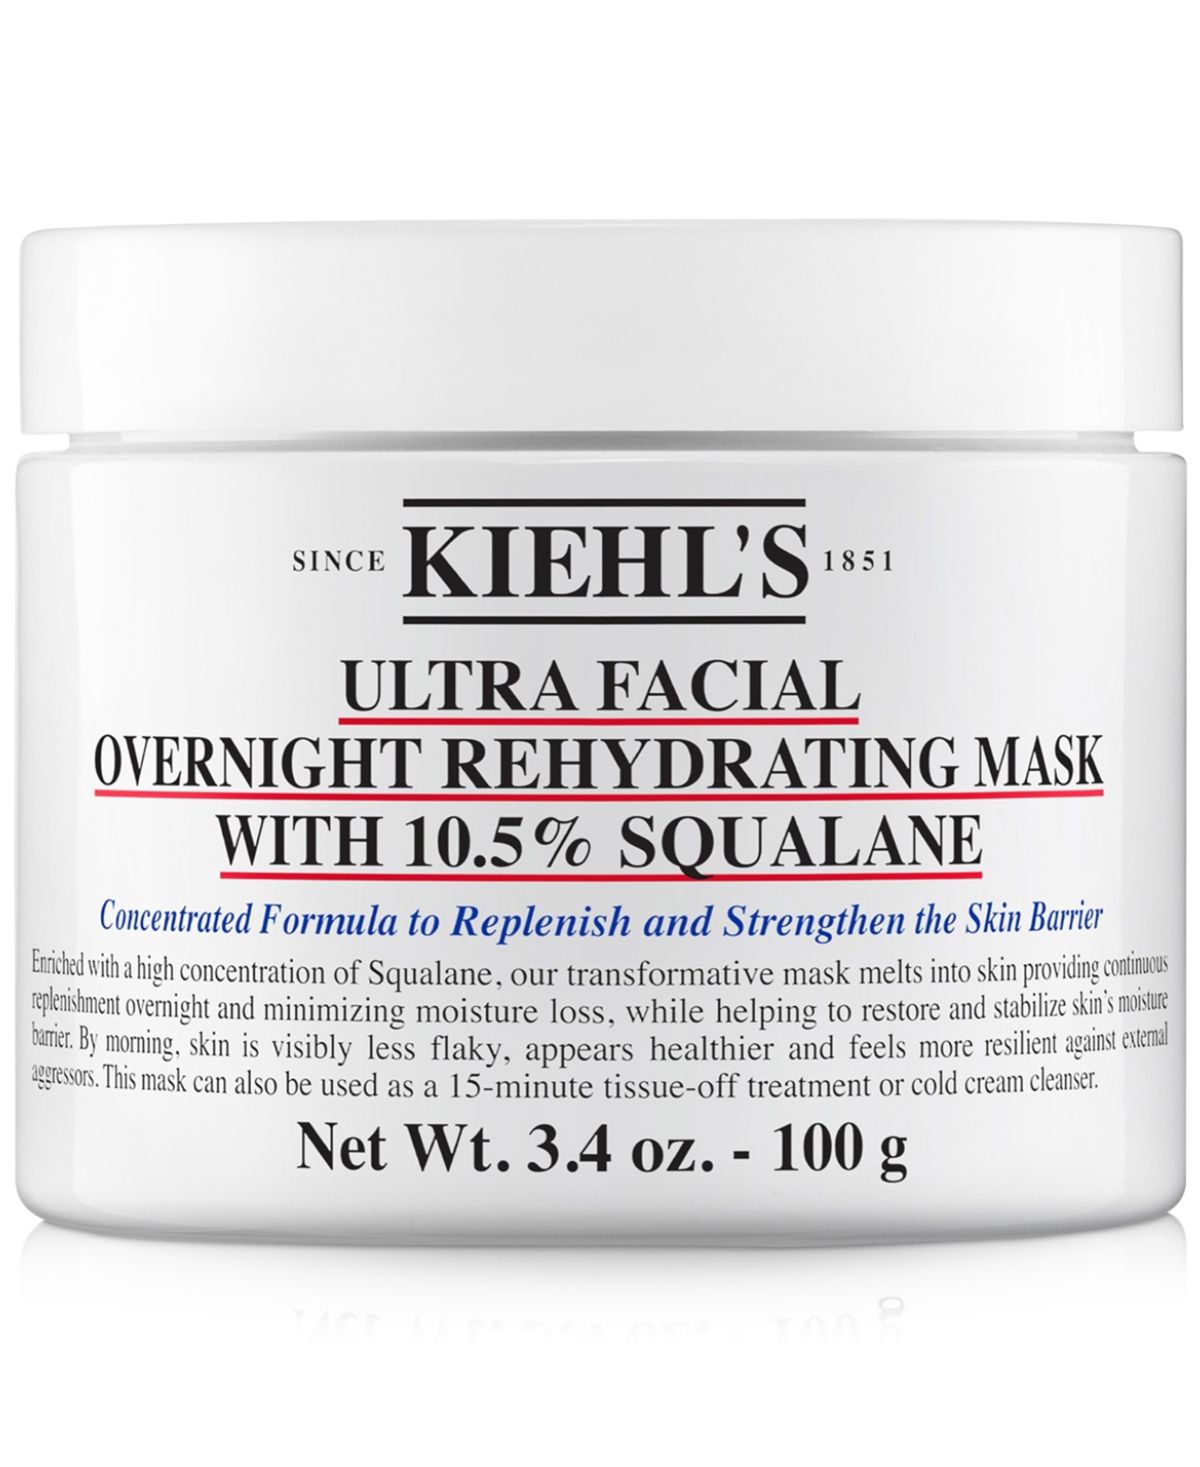 Kiehl's Since 1851 Ultra Facial Overnight Hydrating Mask With 10.5% Squalane, 3.4 oz. | Macys (US)